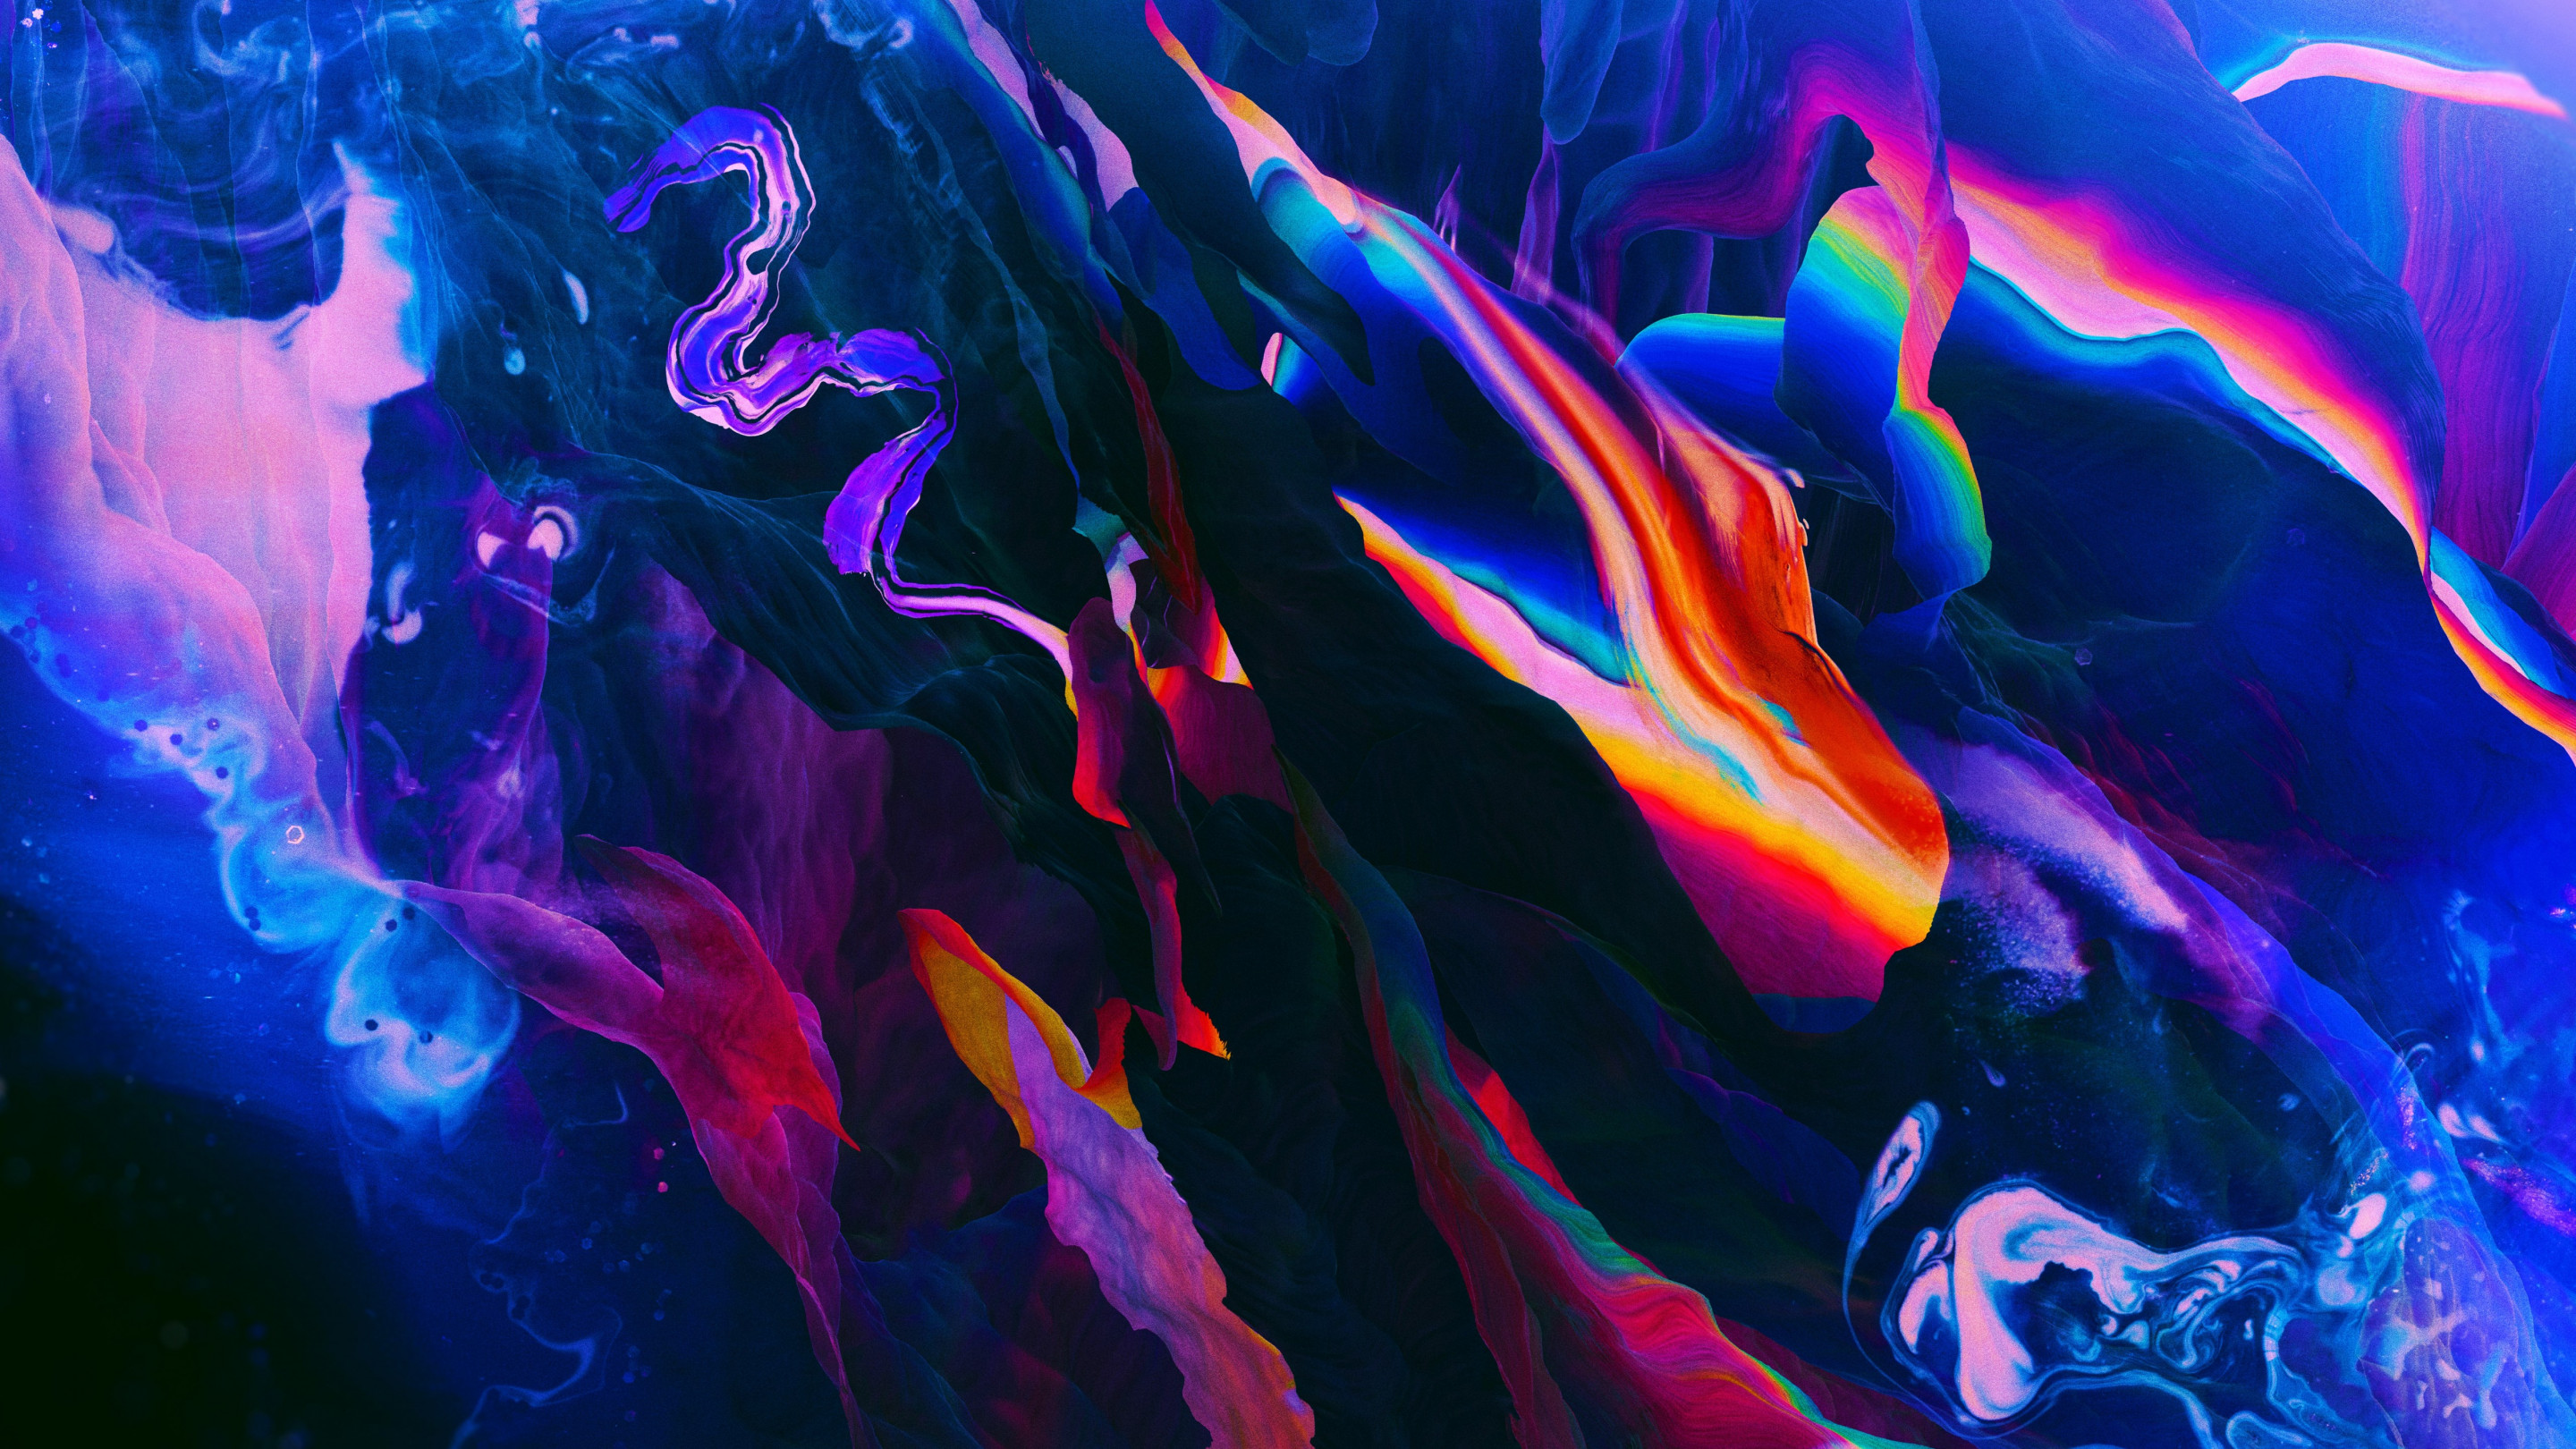 Abstract colorful wallpaper 2880x1620